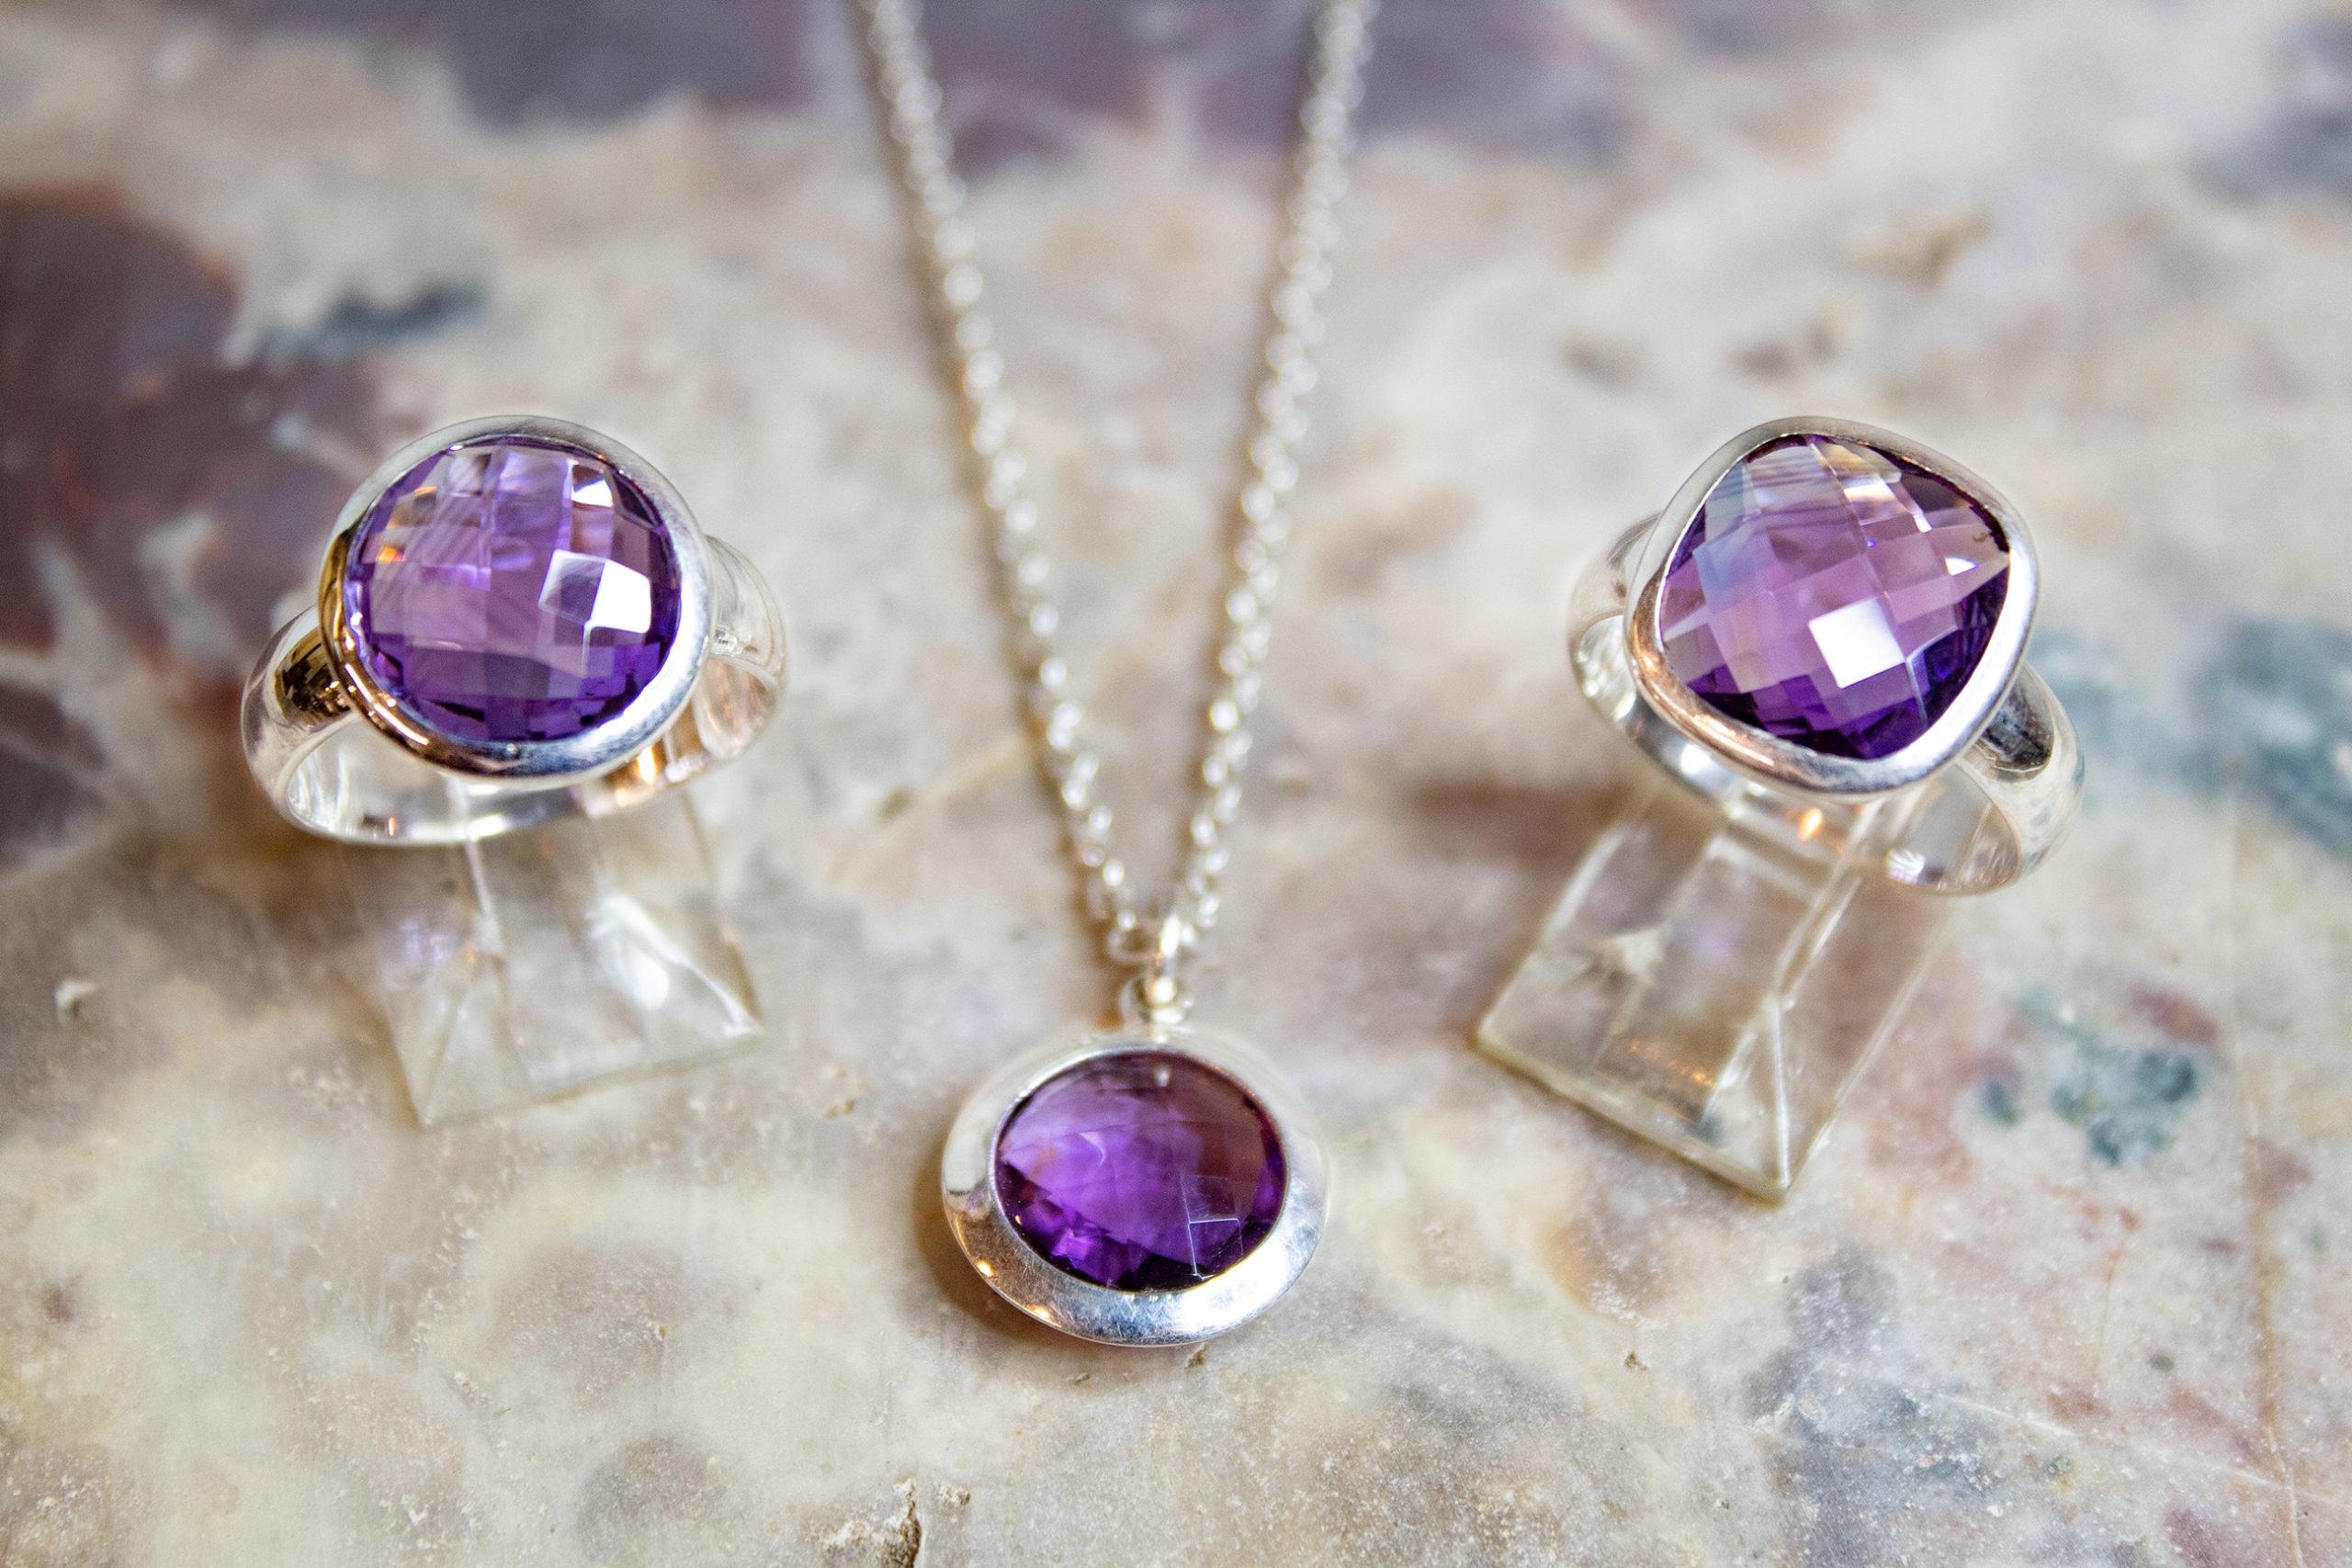 Two round amethyst rings and a necklace